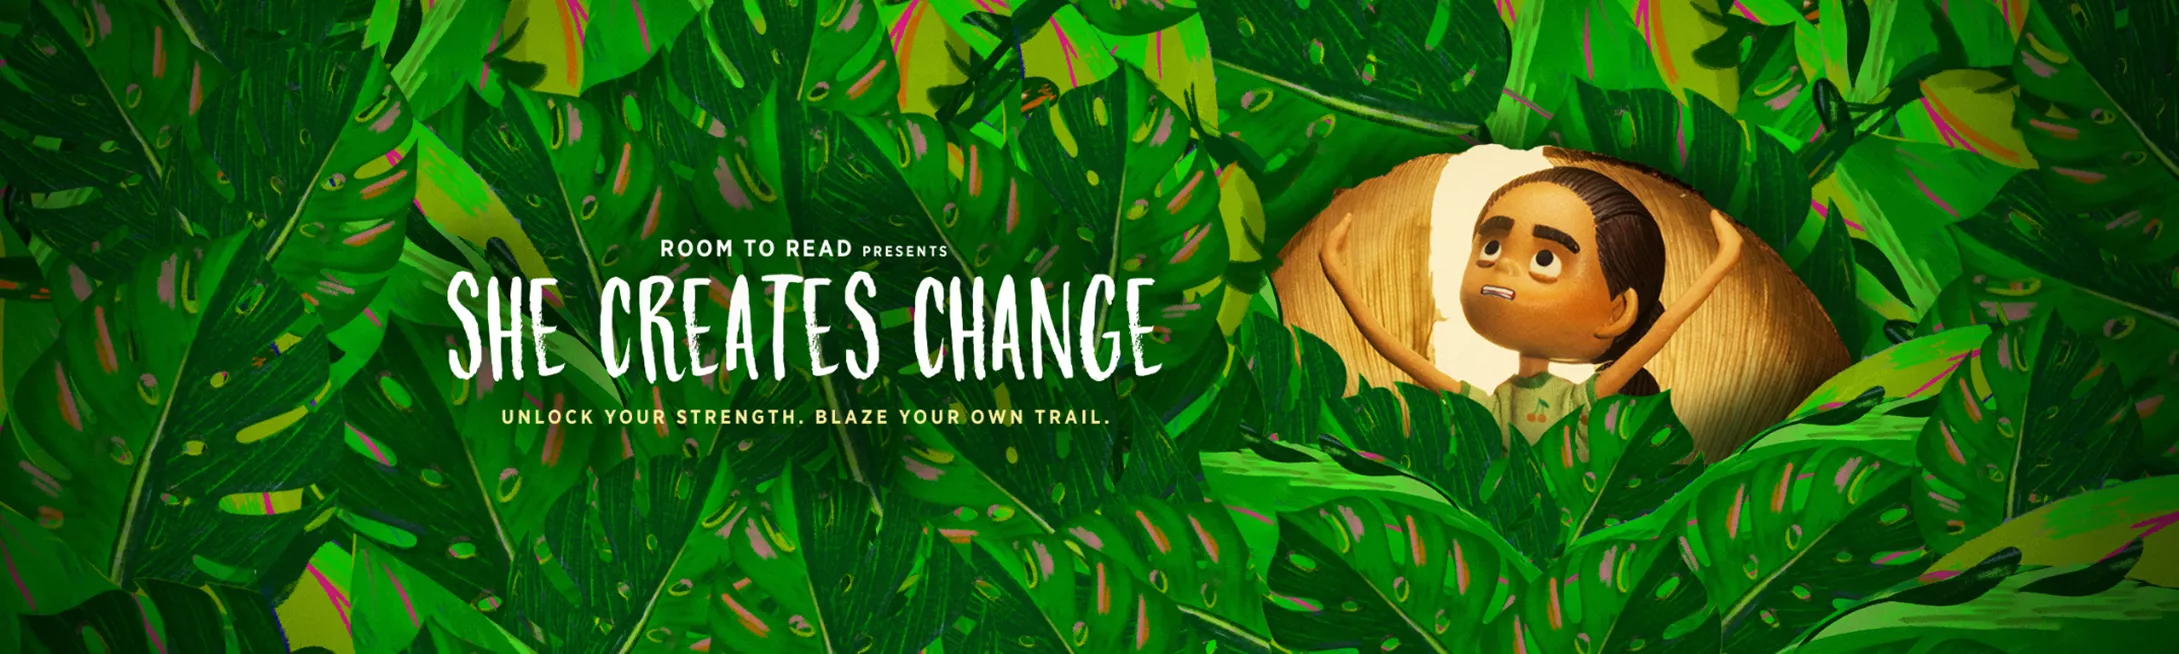 Animation of Sri Lankan girl emerging from a seed surrounded by tropical plan leaves with text overlay "Room to Read Presents: She Creates Change" and "Unlock Your Strength. Blaze Your Own Trail."